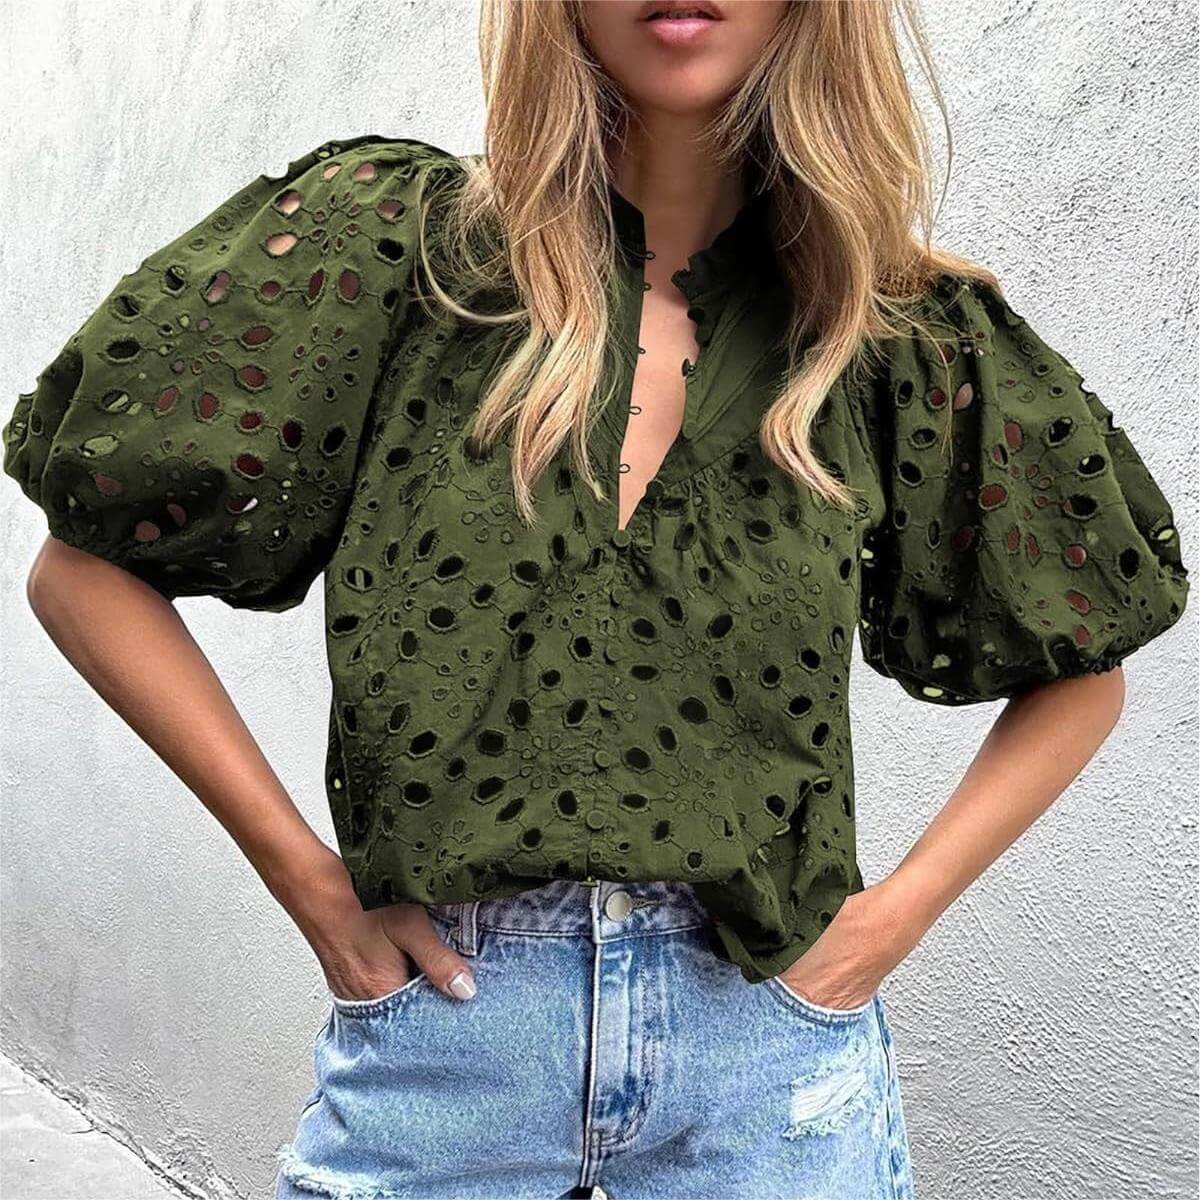 Lined Embroidered Cutout Lantern Sleeve Shirt